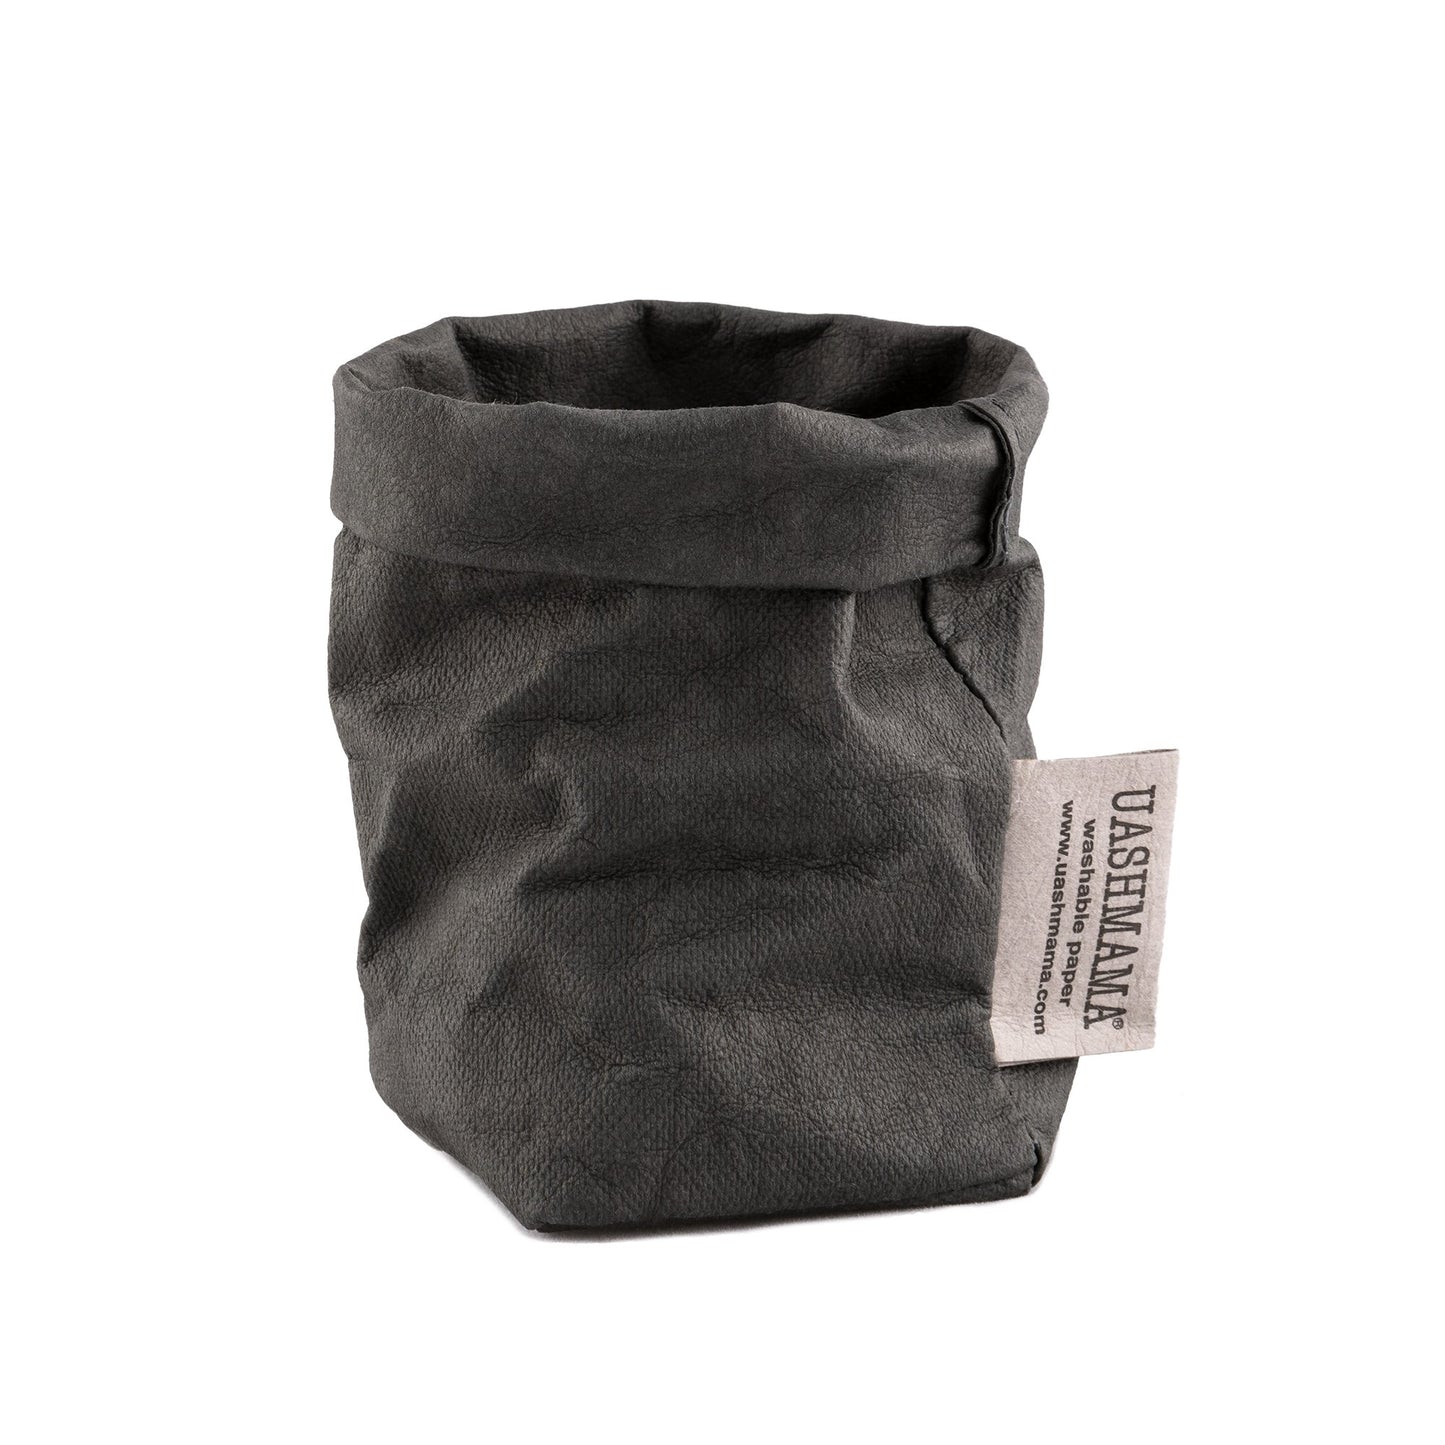 A washable paper bag is shown. The bag is rolled down at the top and features a UASHMAMA logo label on the bottom left corner. The bag pictured is the extra small size in dark grey.